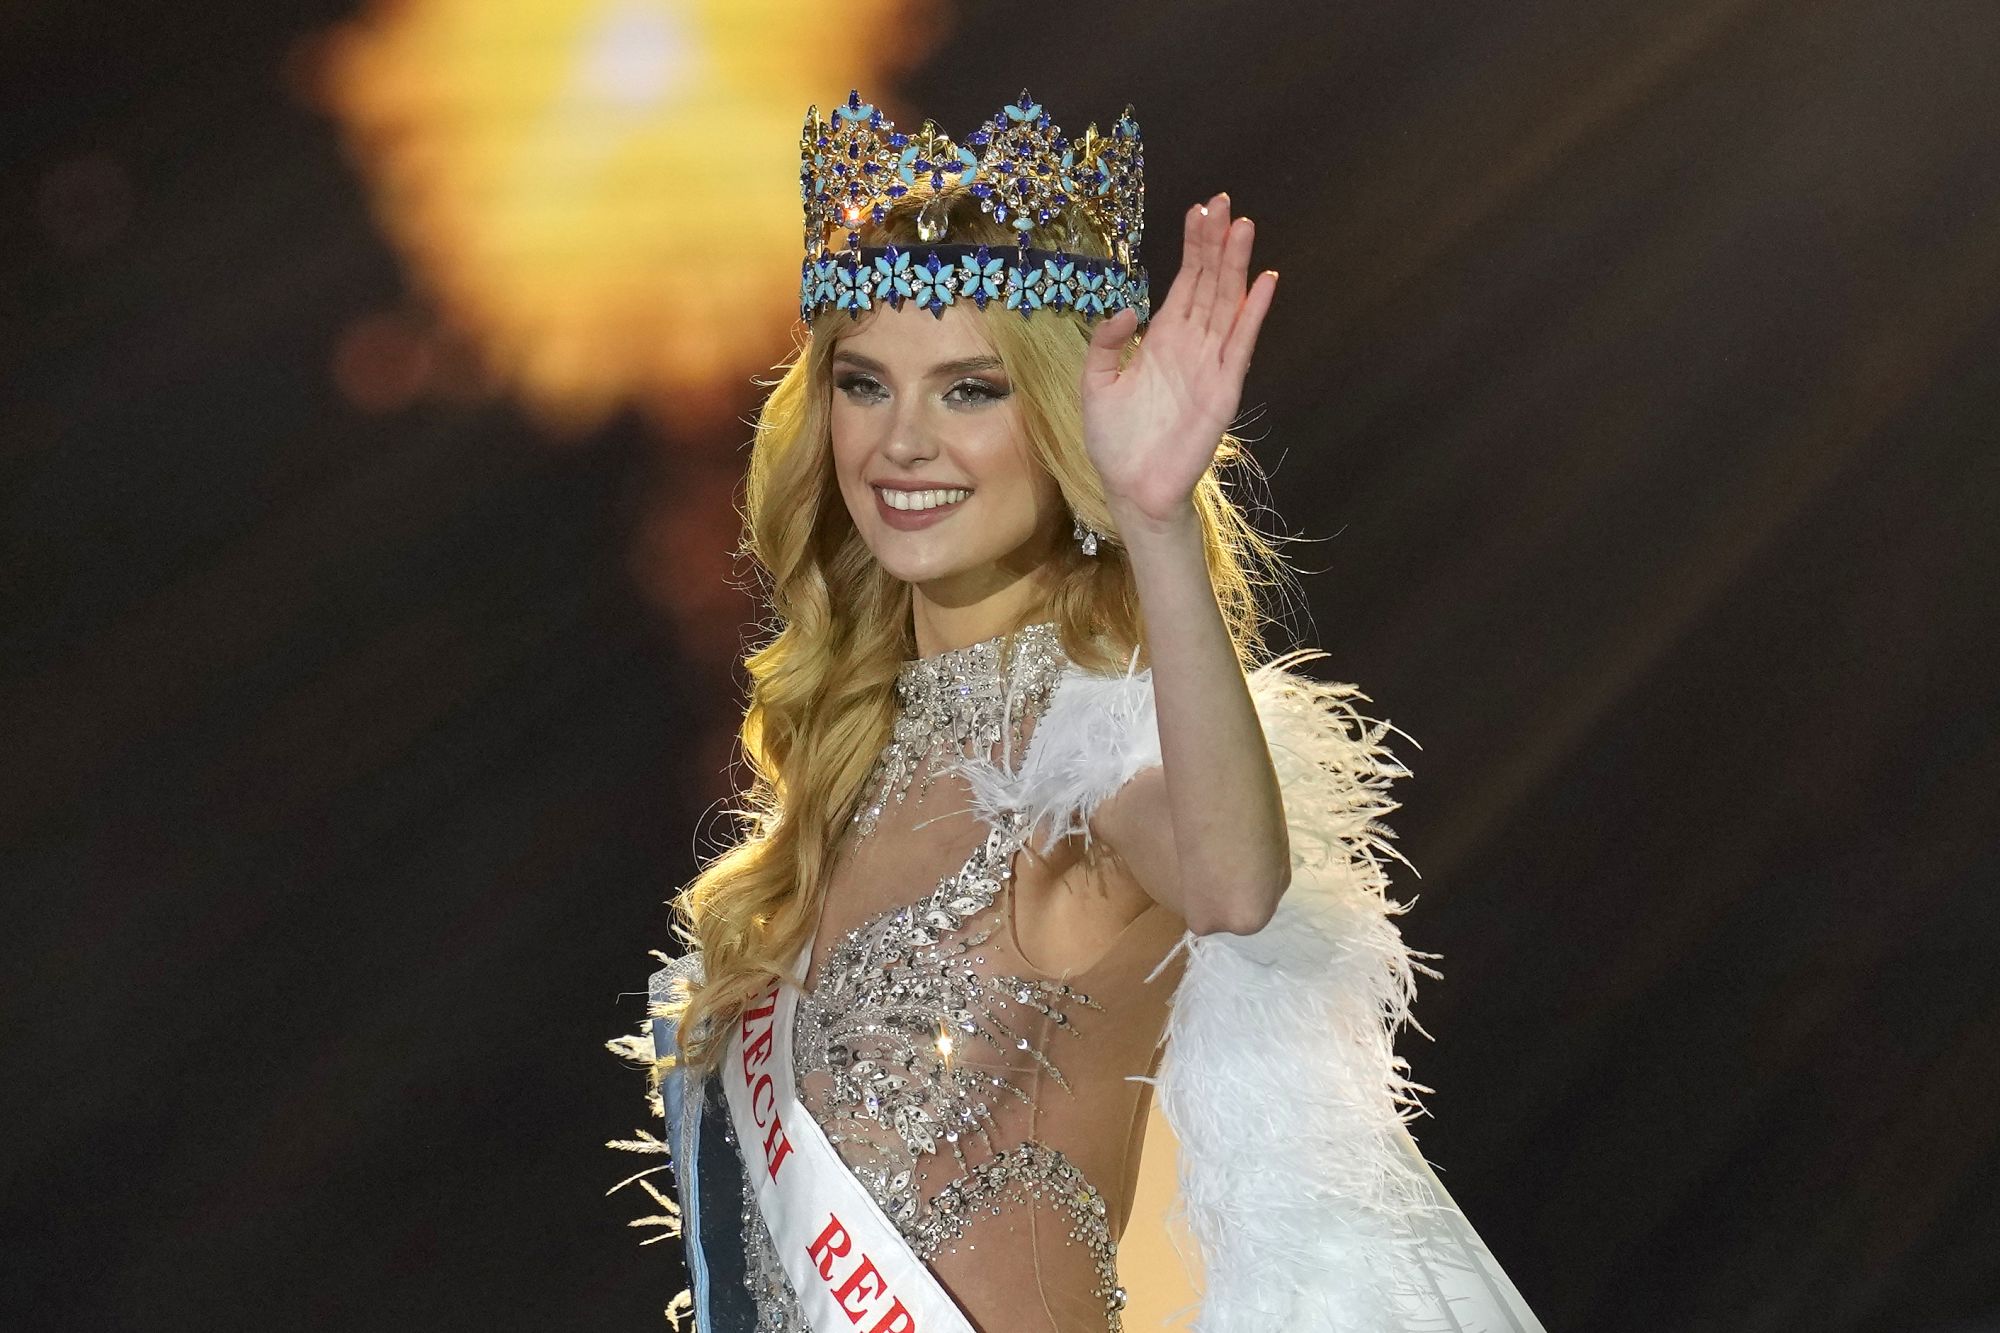 Krystyna Pyszková of Czech Republic waves after being crowned as the new Miss World at the pageant in Mumbai, India on March 9.